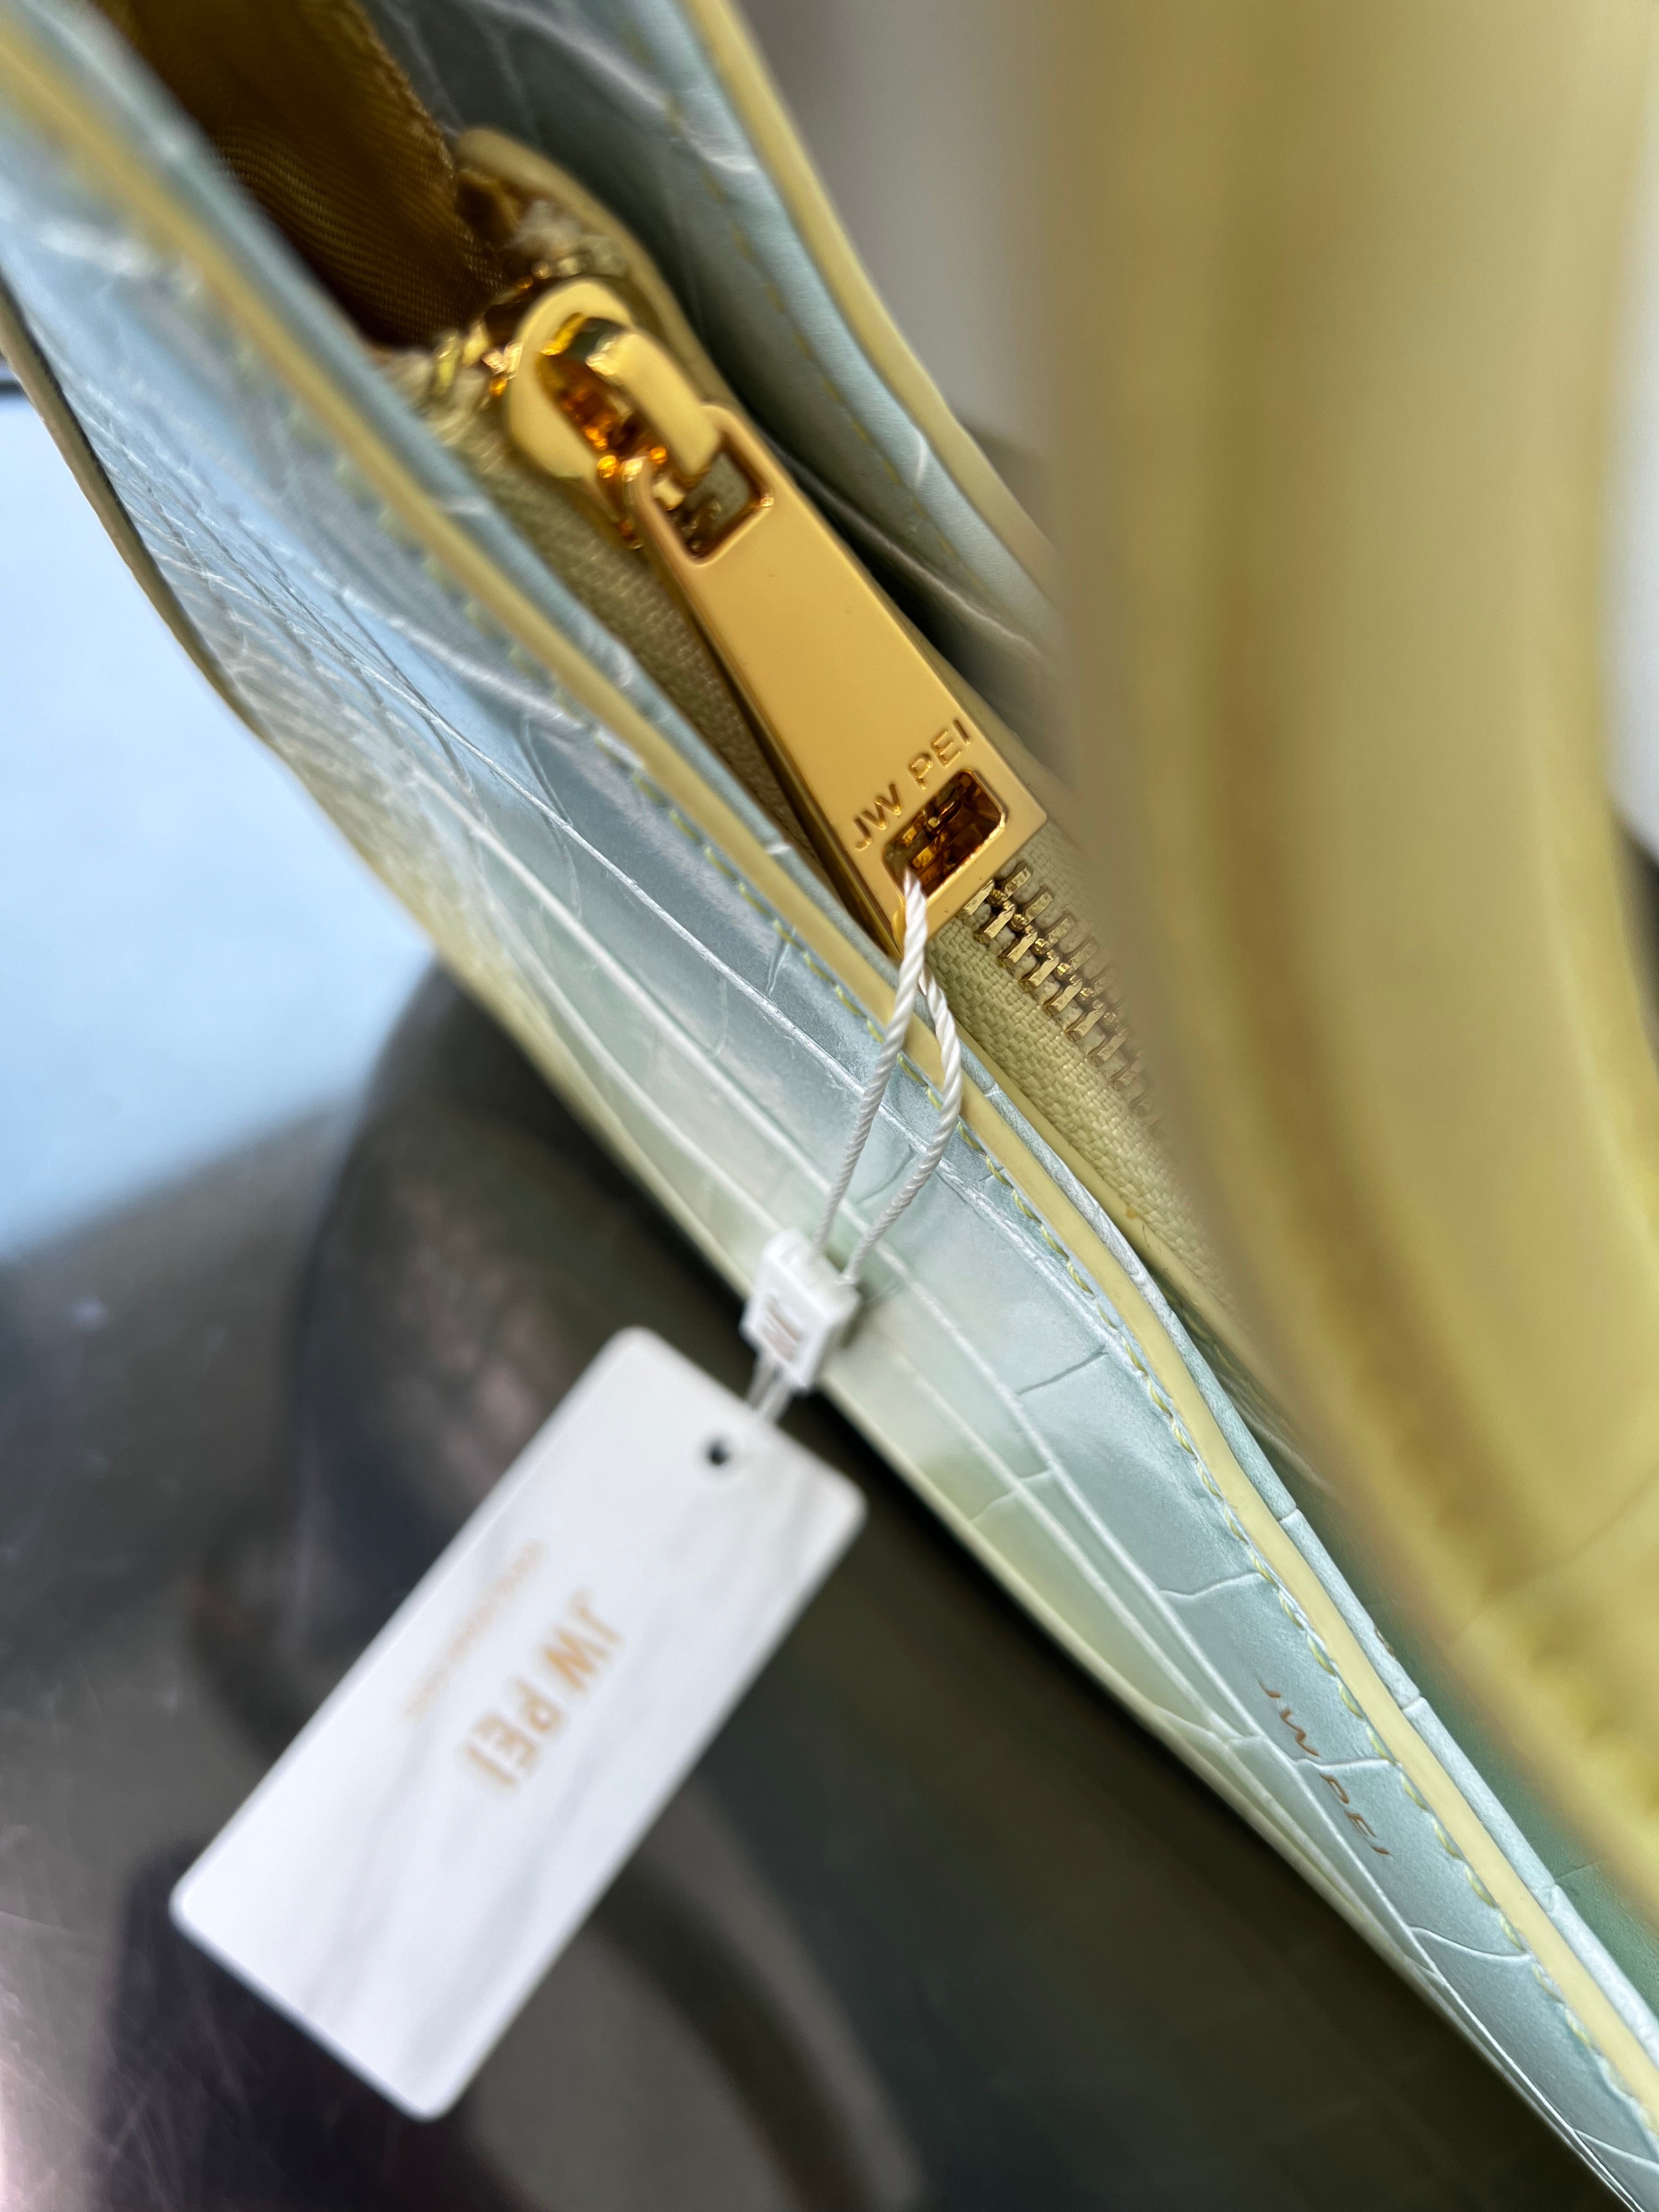 Ruby shoulder bag light yellow and blue gradient - JW PEI